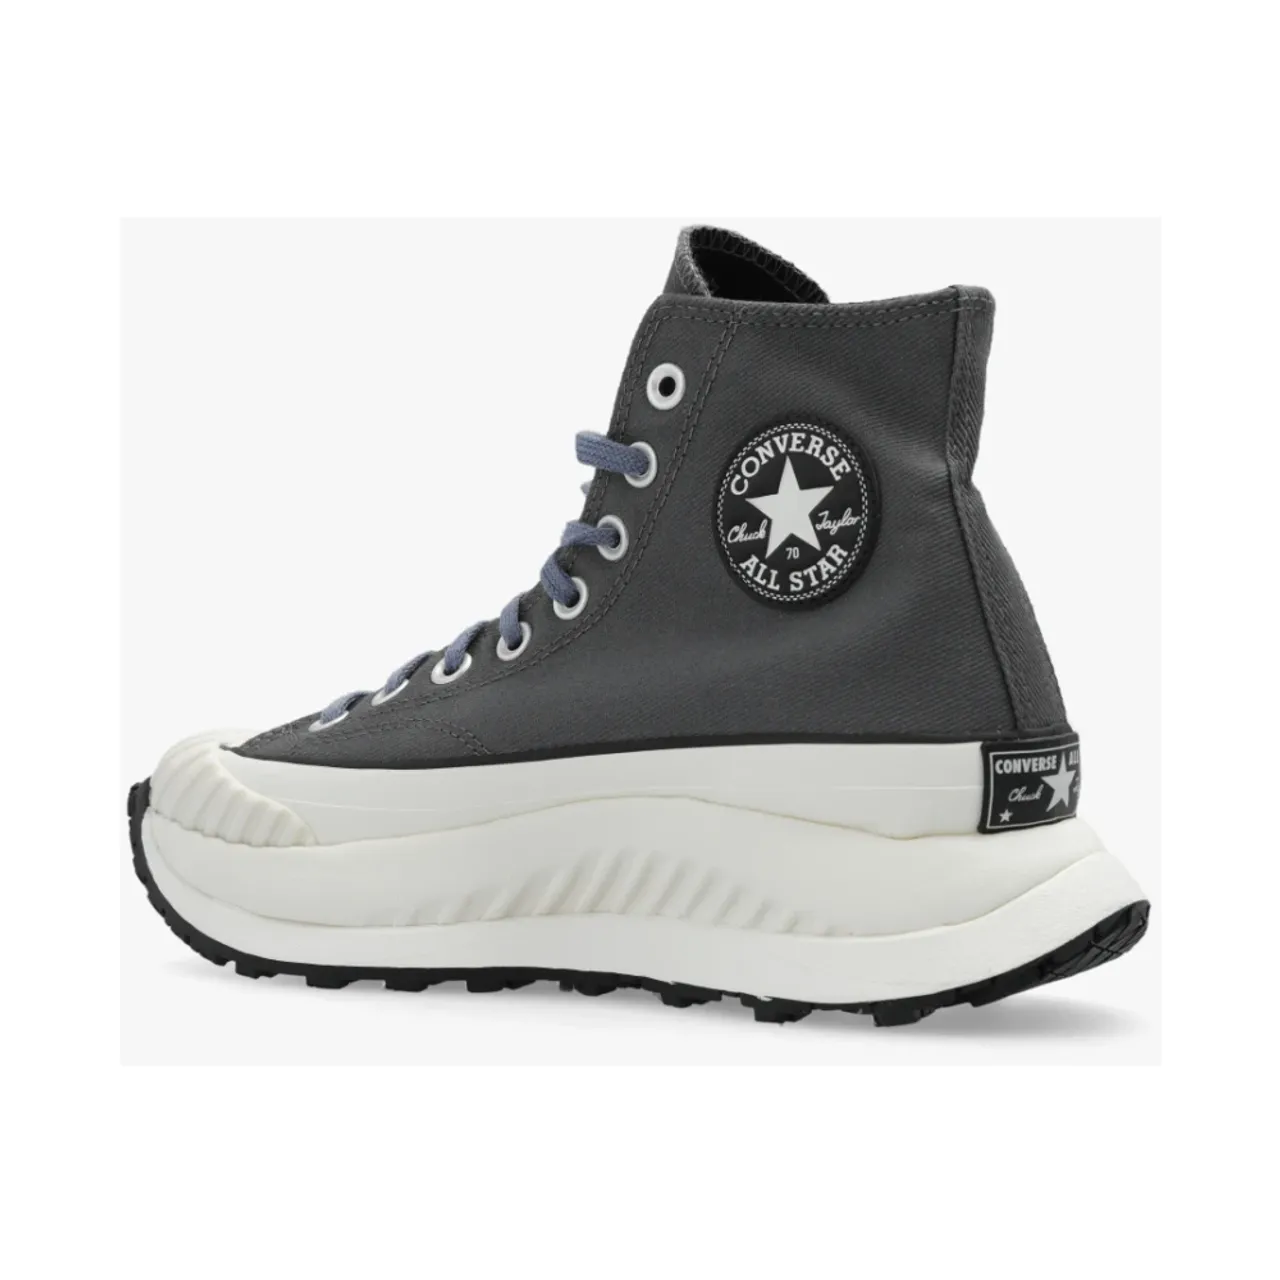 Converse , ‘Chuck 70 At-Cx HI’ sneakers ,Gray male, Sizes: